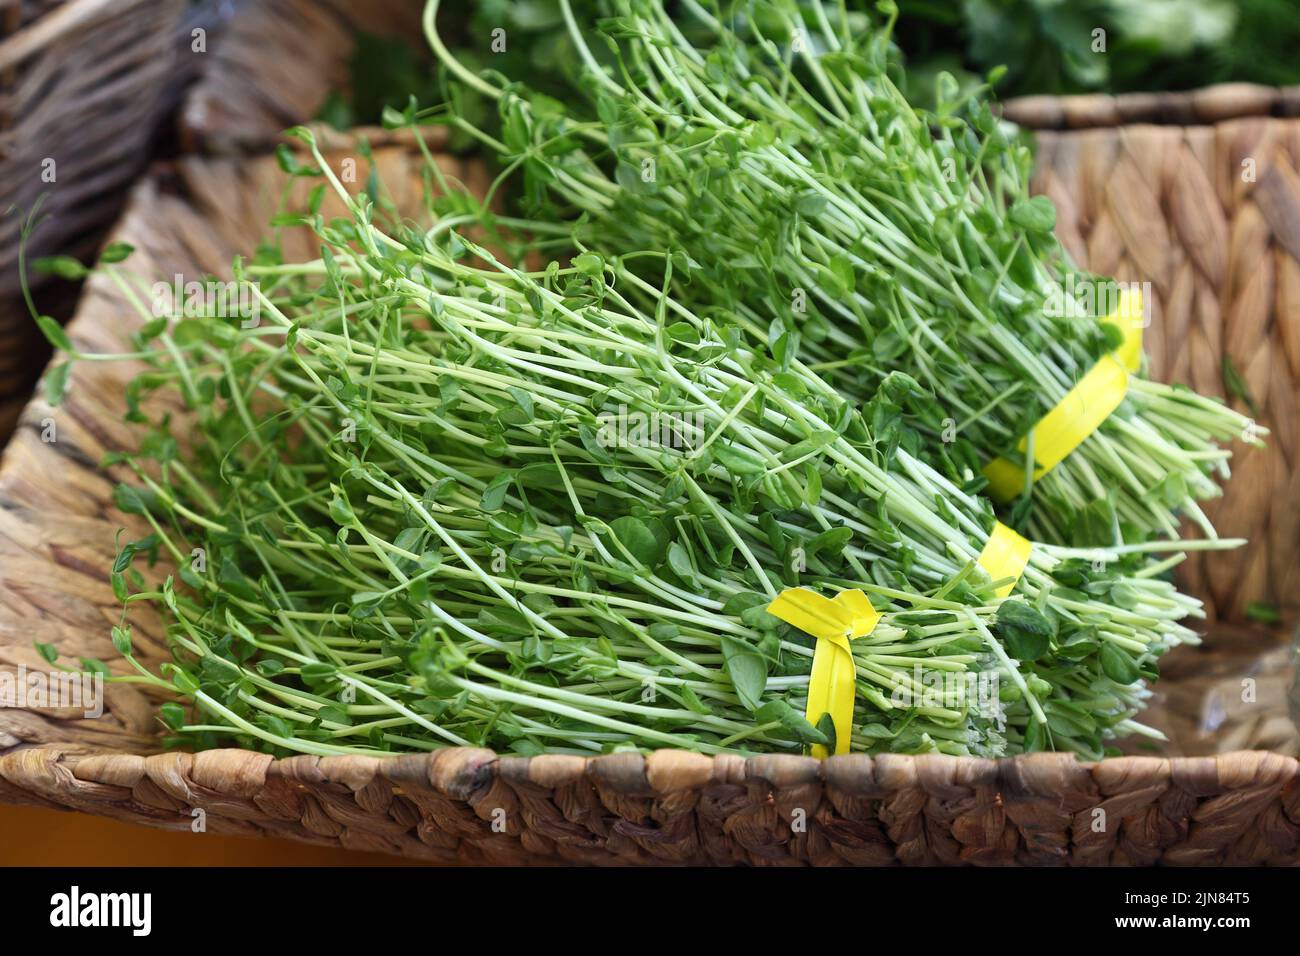 Pea Shoots for sale at the farmer's market Stock Photo